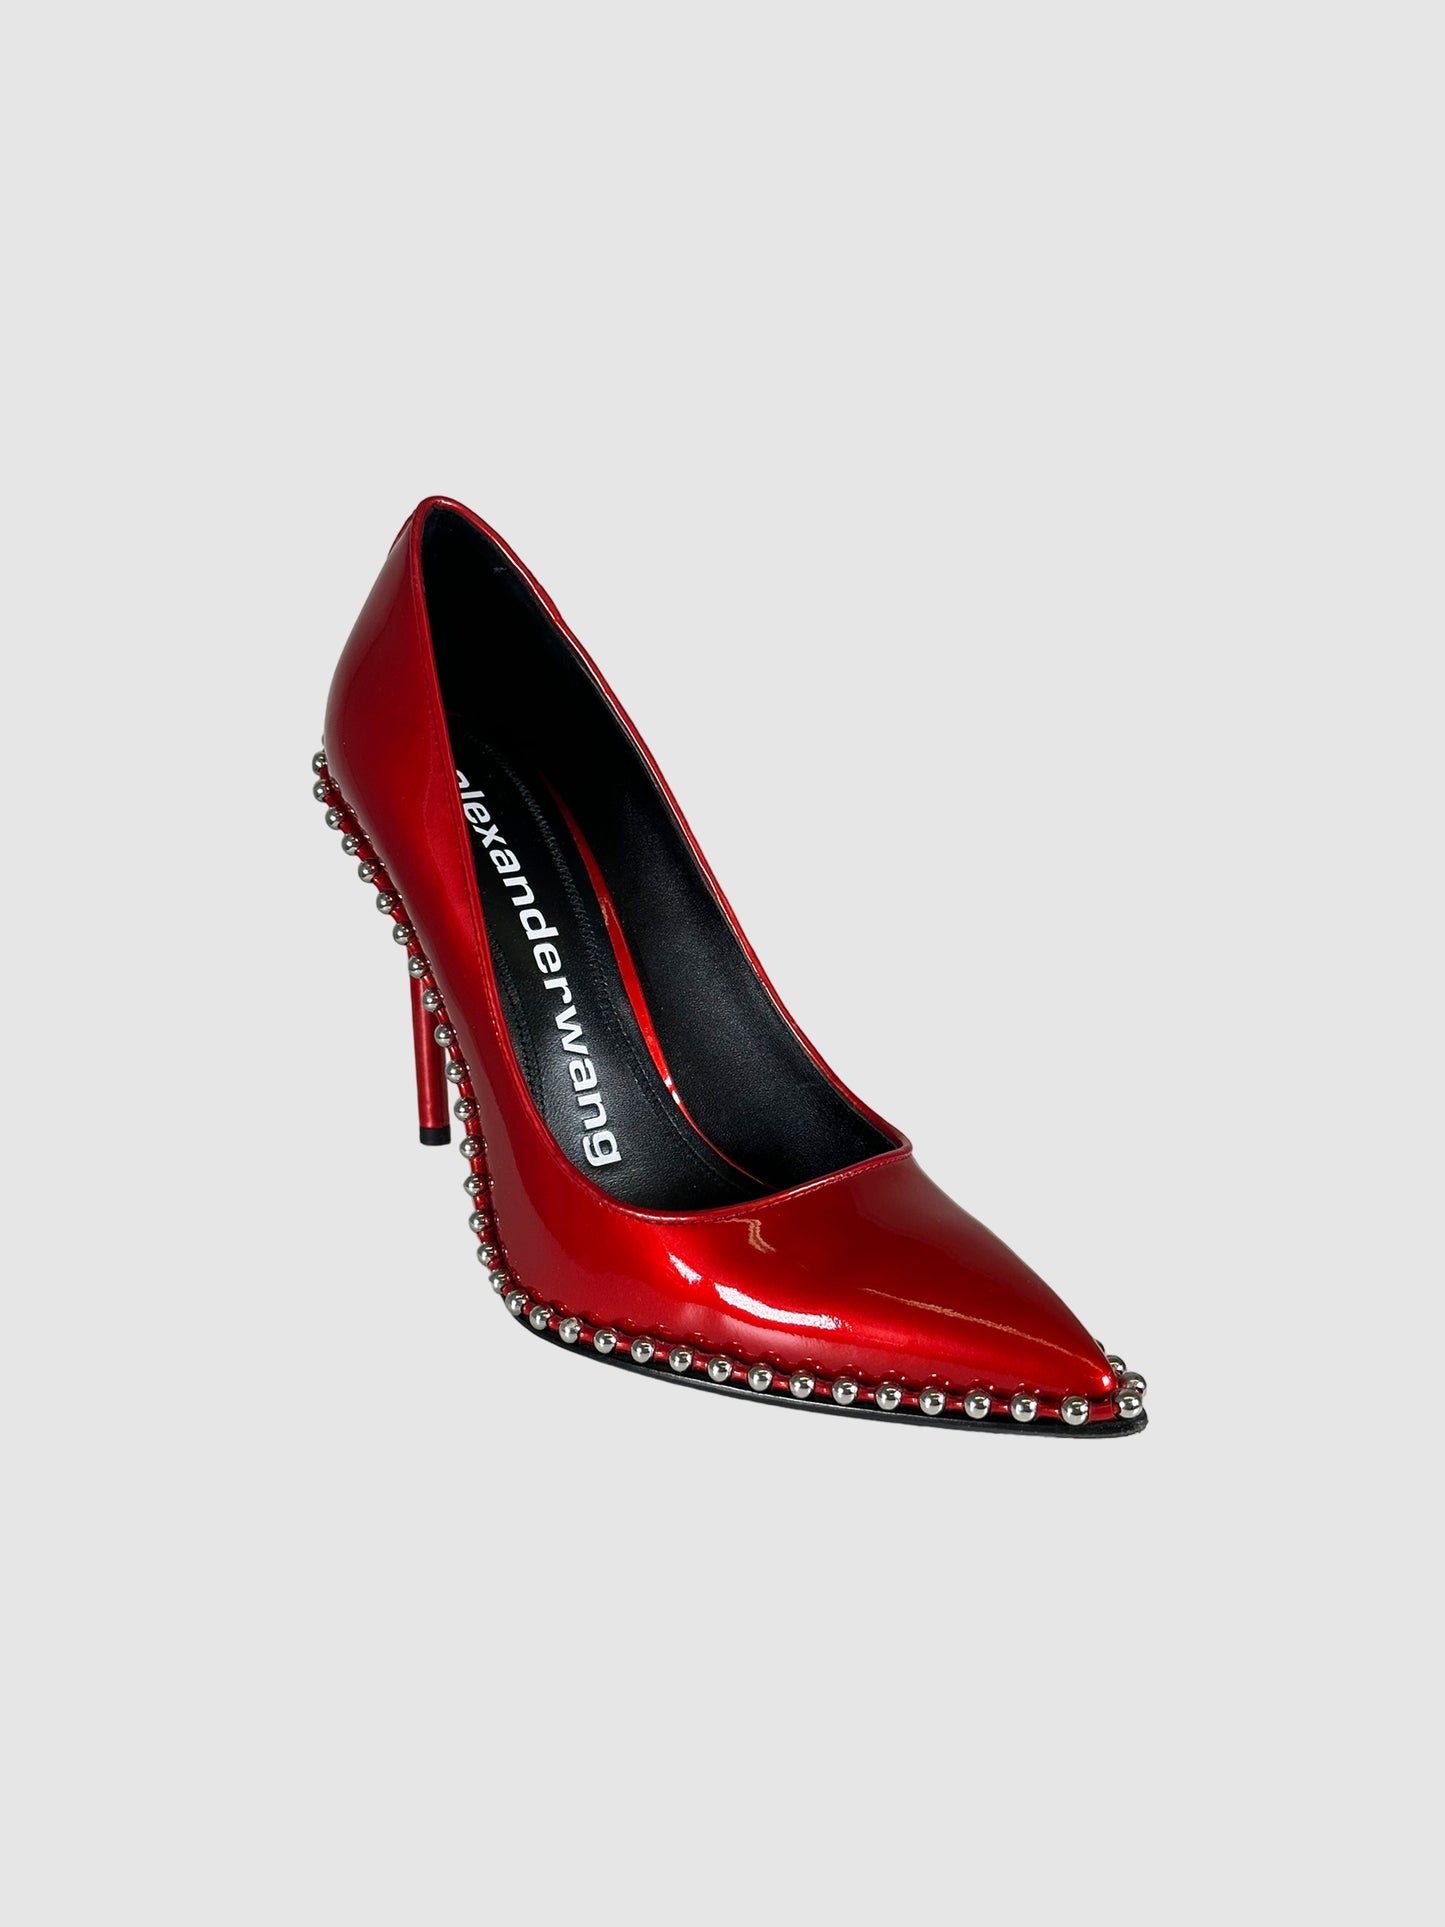 Patent Leather Studded Accents Pumps - Size 39